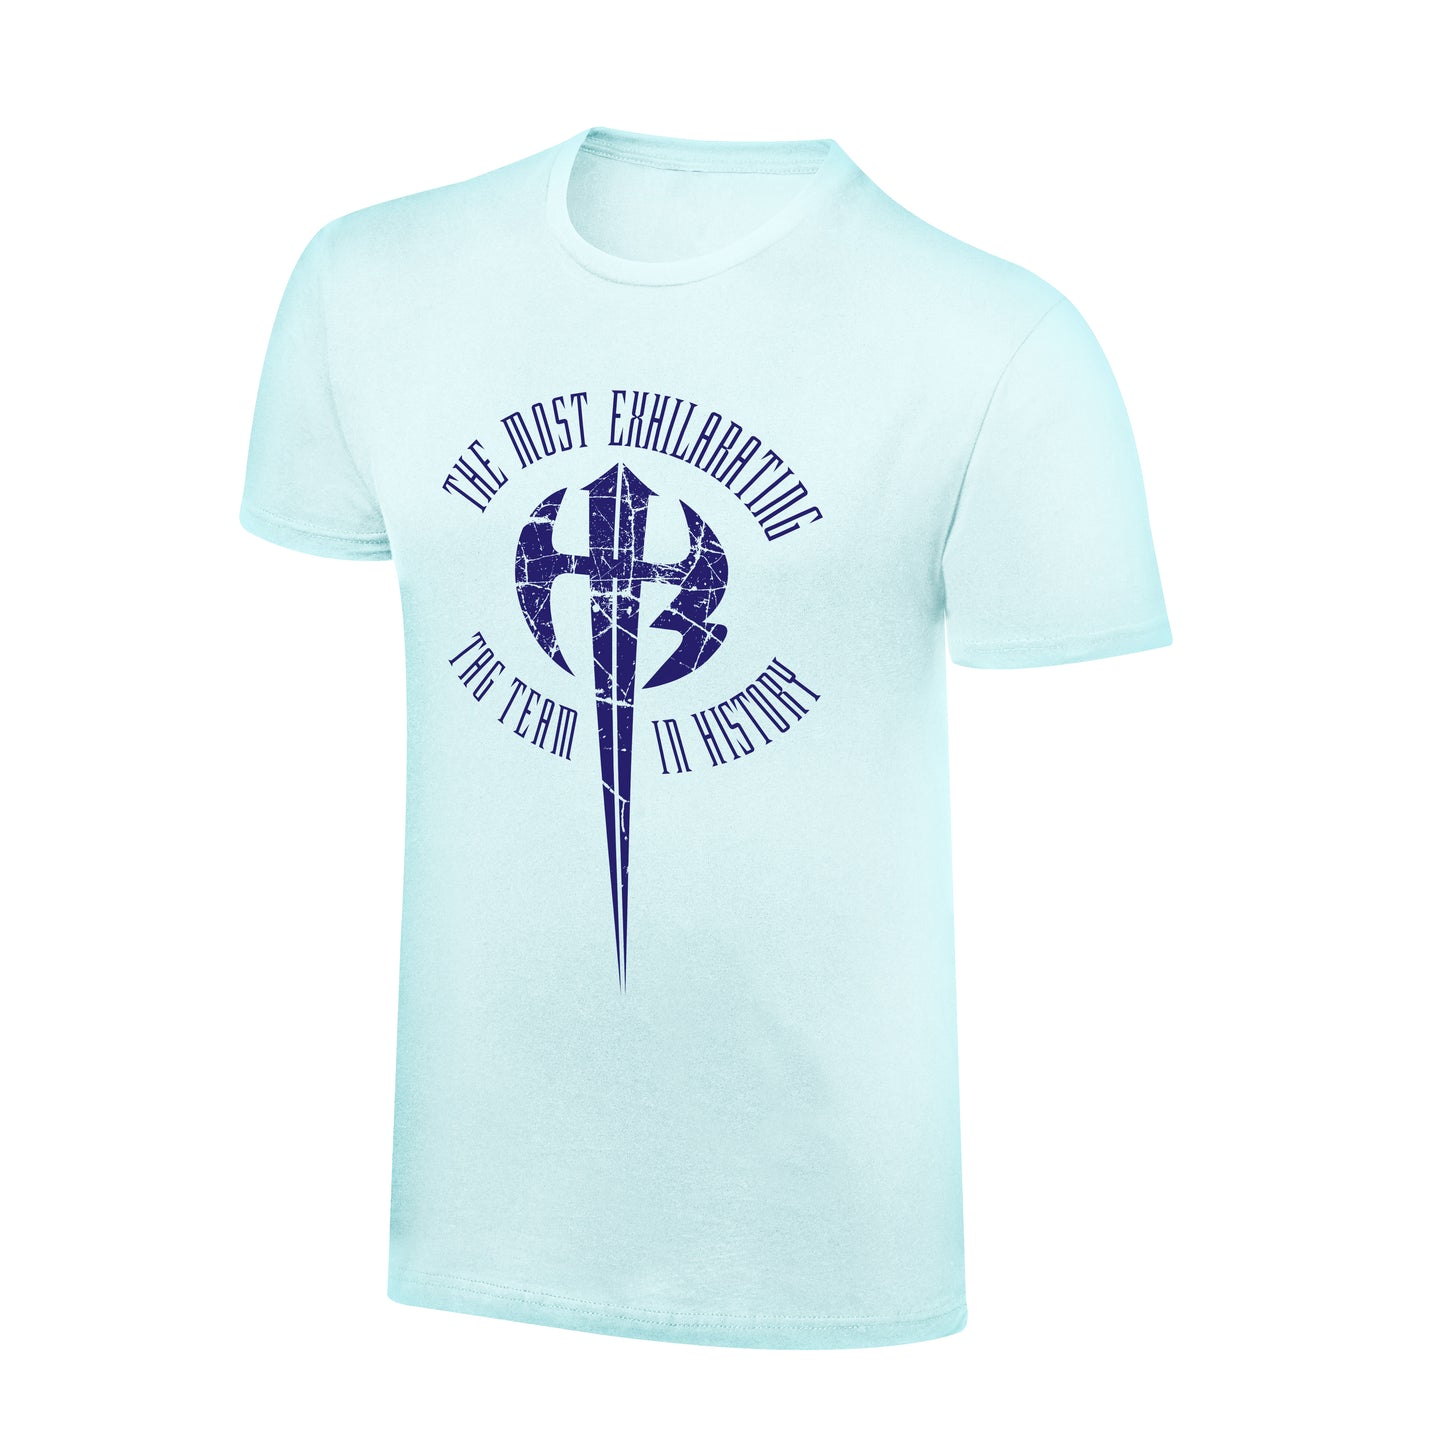 The Hardy Boyz The Most Exhilarating Tag Team T-Shirt